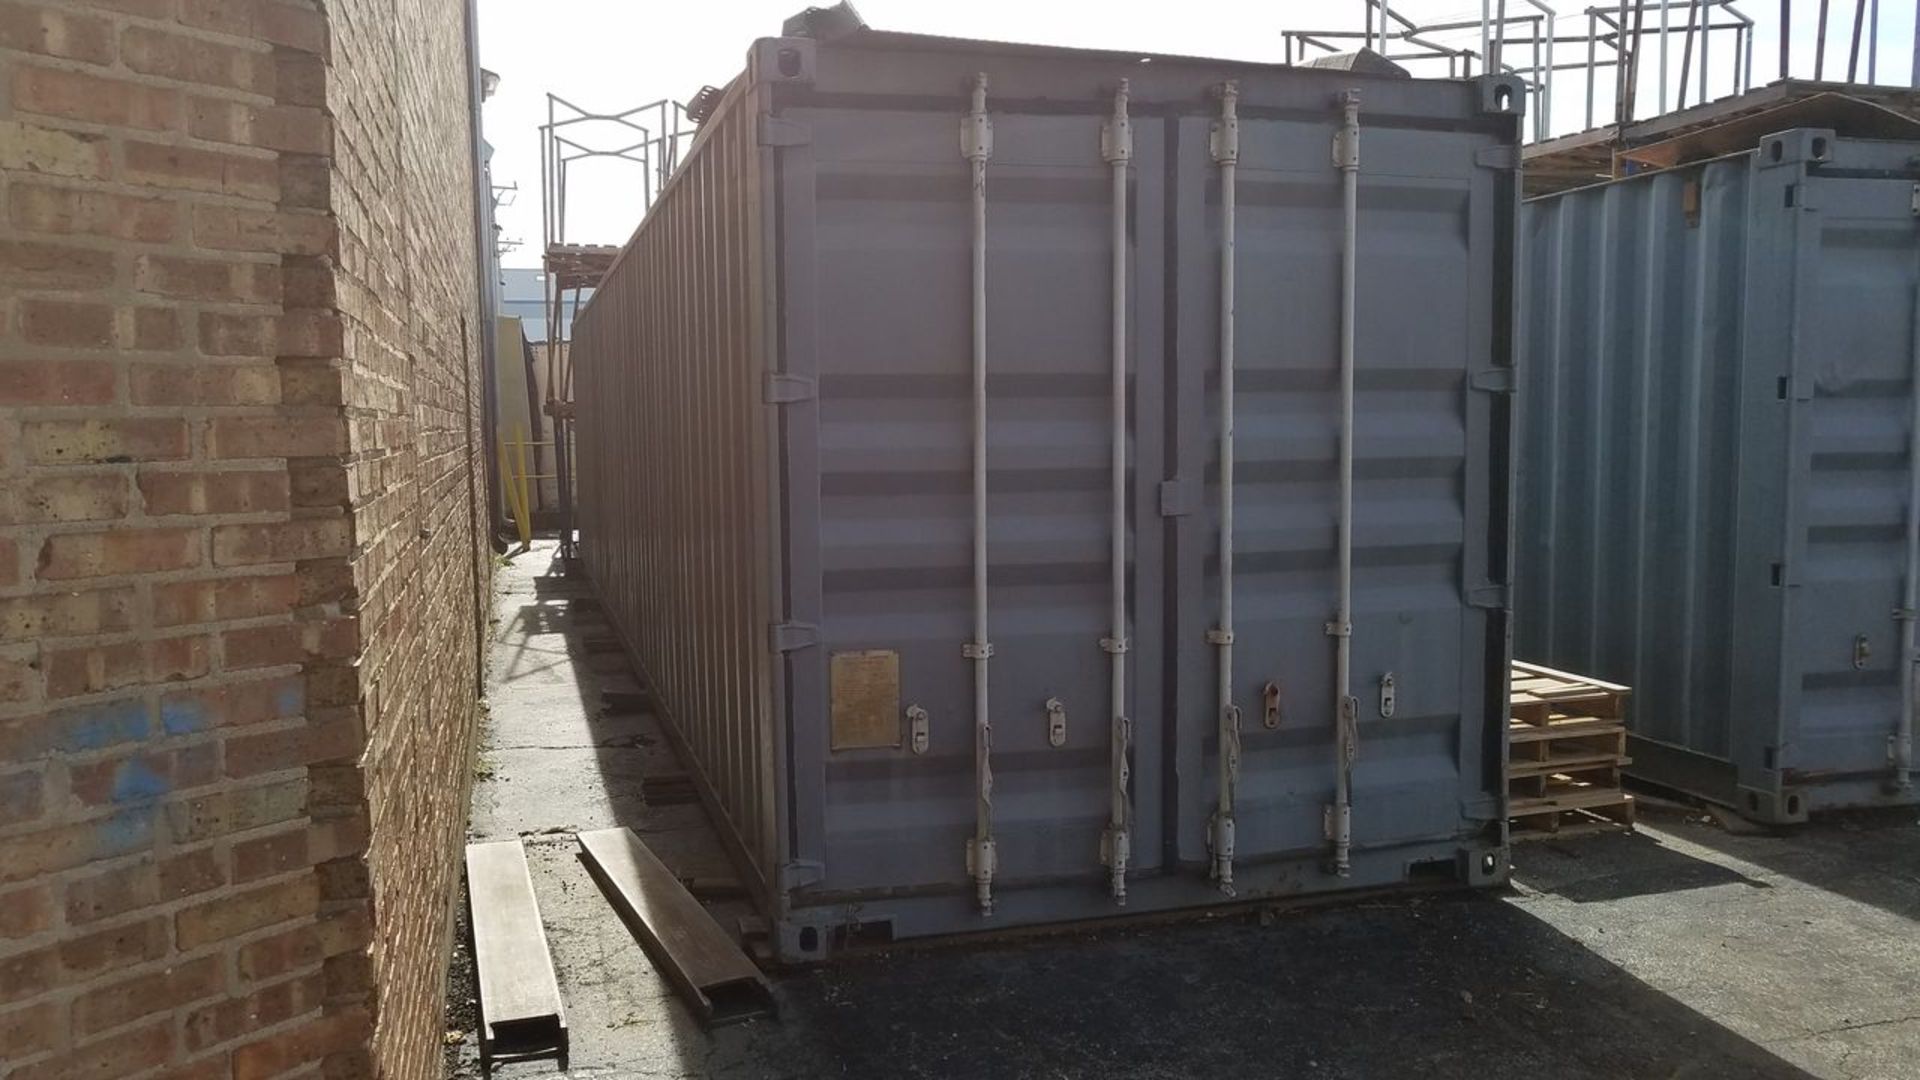 Ningbo Xinhuachang Intl Containers Co. 40 ft. Model CX03-40TTN Shipping Container, S/N: CXIC- - Image 2 of 3